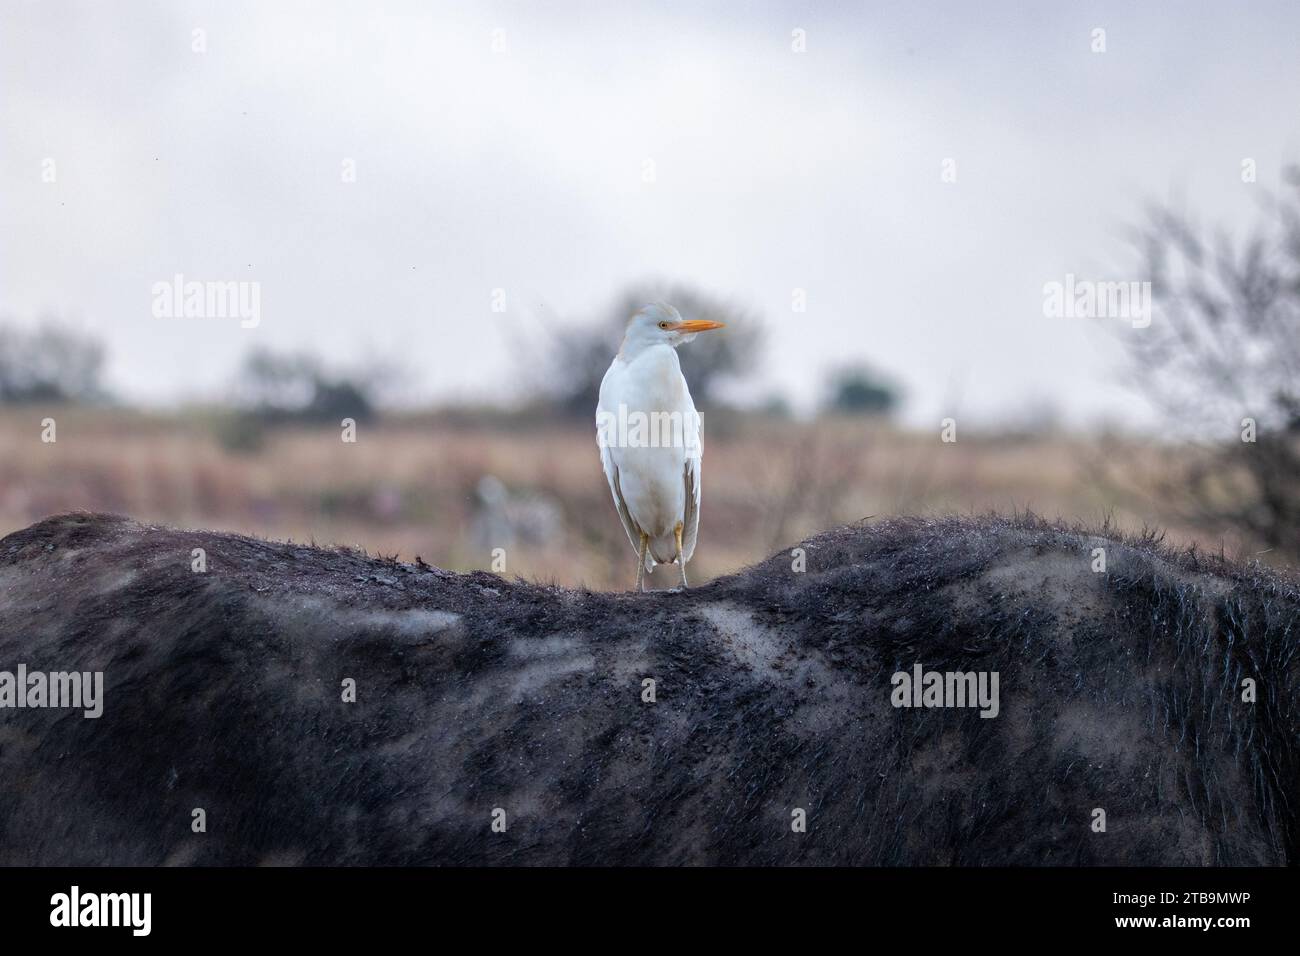 A Cattle egret on the back of an African buffalo Stock Photo